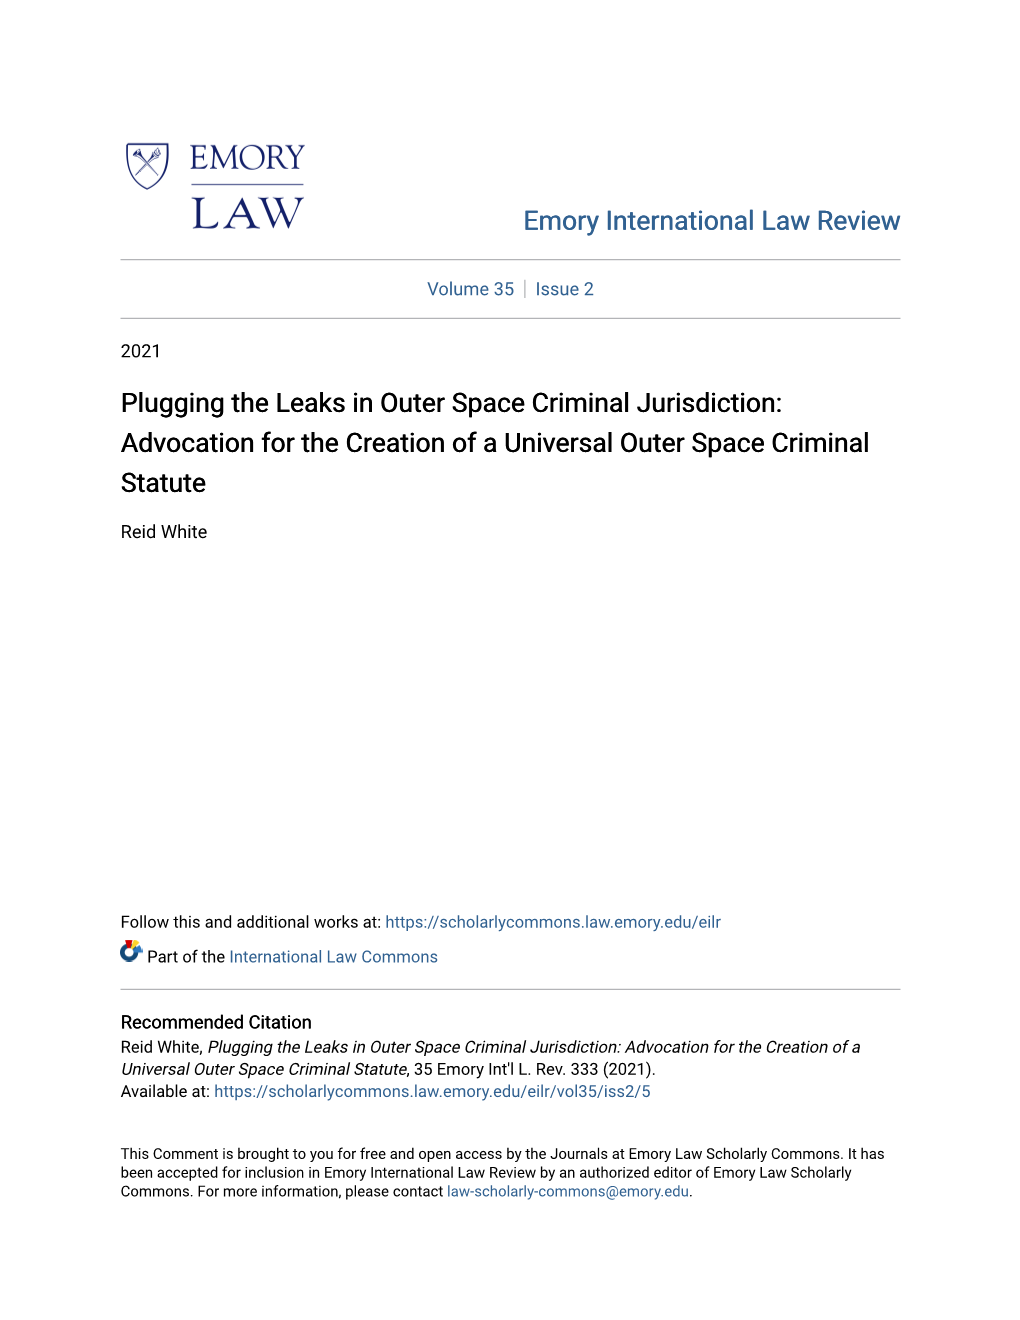 Plugging the Leaks in Outer Space Criminal Jurisdiction: Advocation for the Creation of a Universal Outer Space Criminal Statute